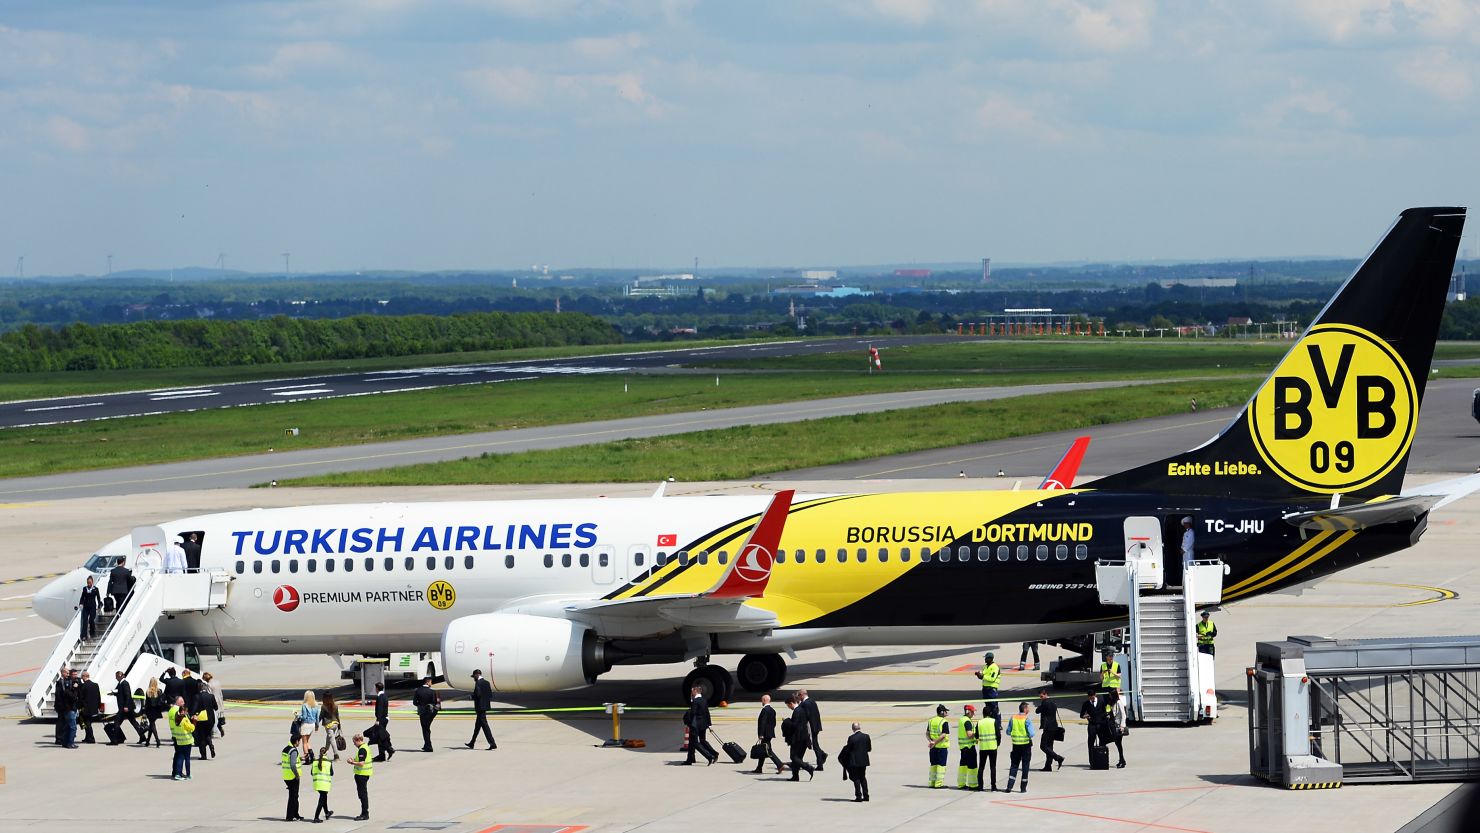 From Manchester United to Borussia Dortmund, Turkish Airlines has aligned itself with successful football teams, and other airlines have followed suit. 